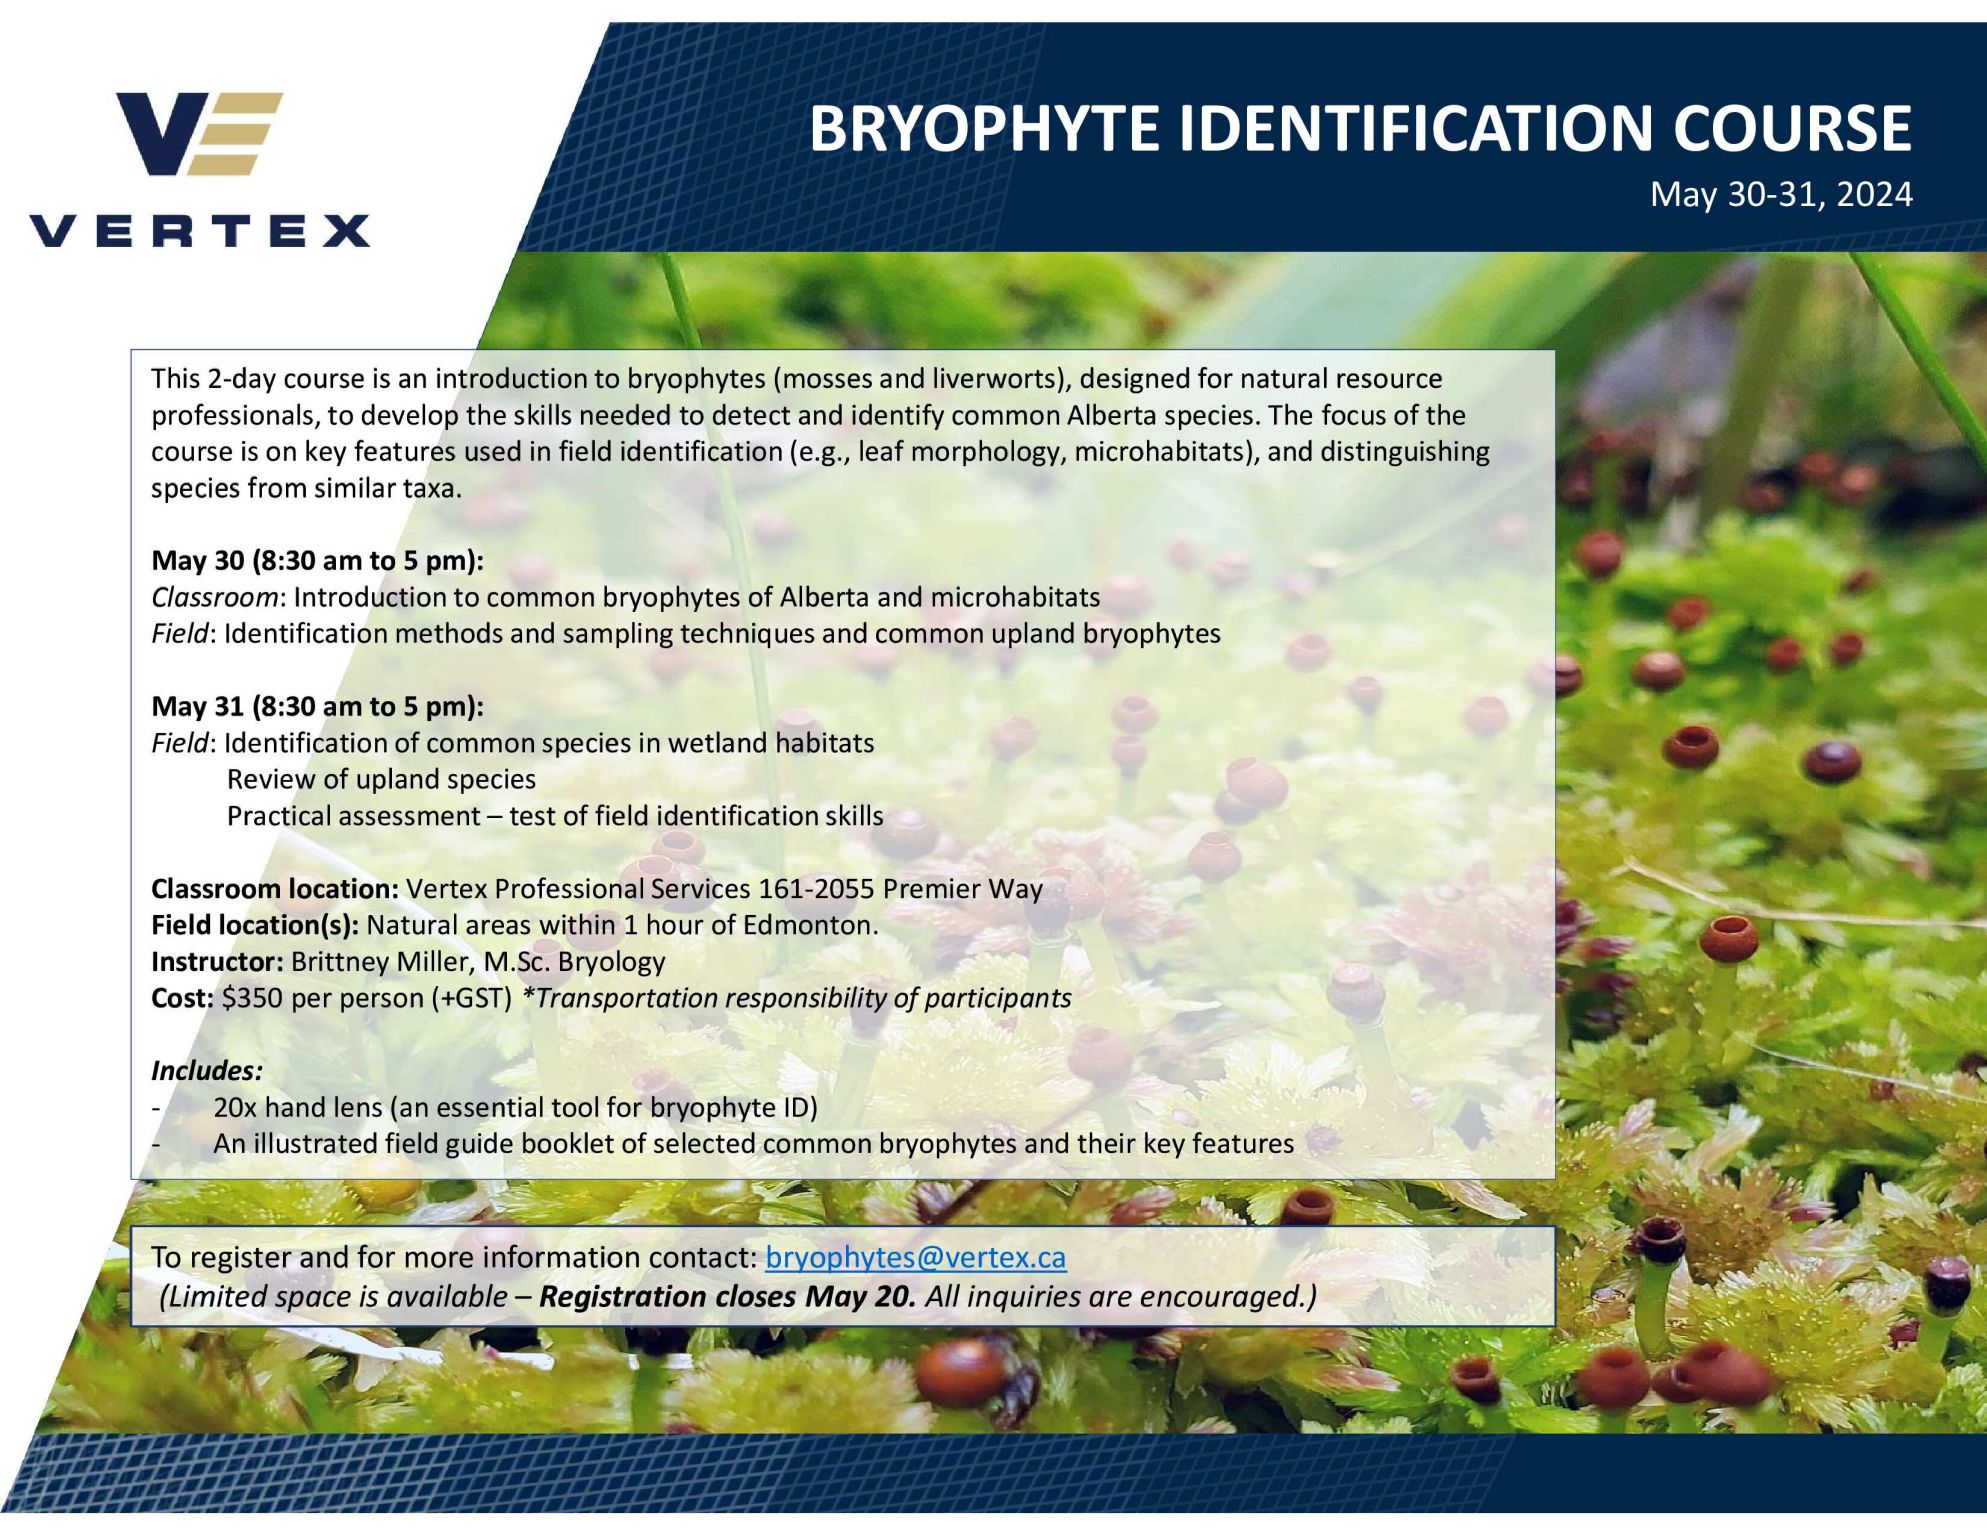 Course advertisement - For more info contact bryophytes@vertex.ca